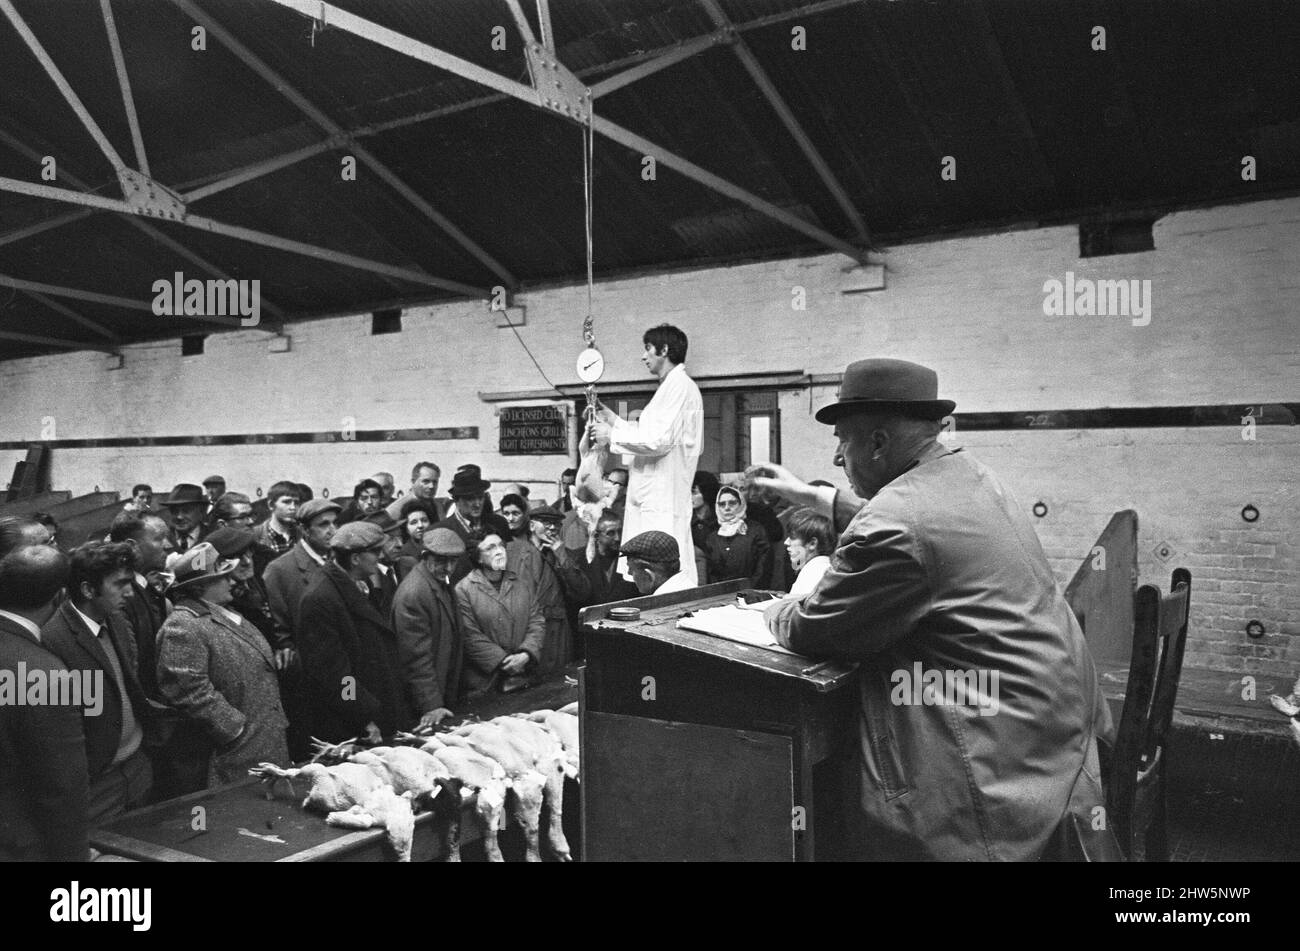 Auctioneer taking bids during Christmas Turkey Auction at Reading Cattle Market in Great Knolly's Street on Christmas eve. 24th December 1968 Stock Photo